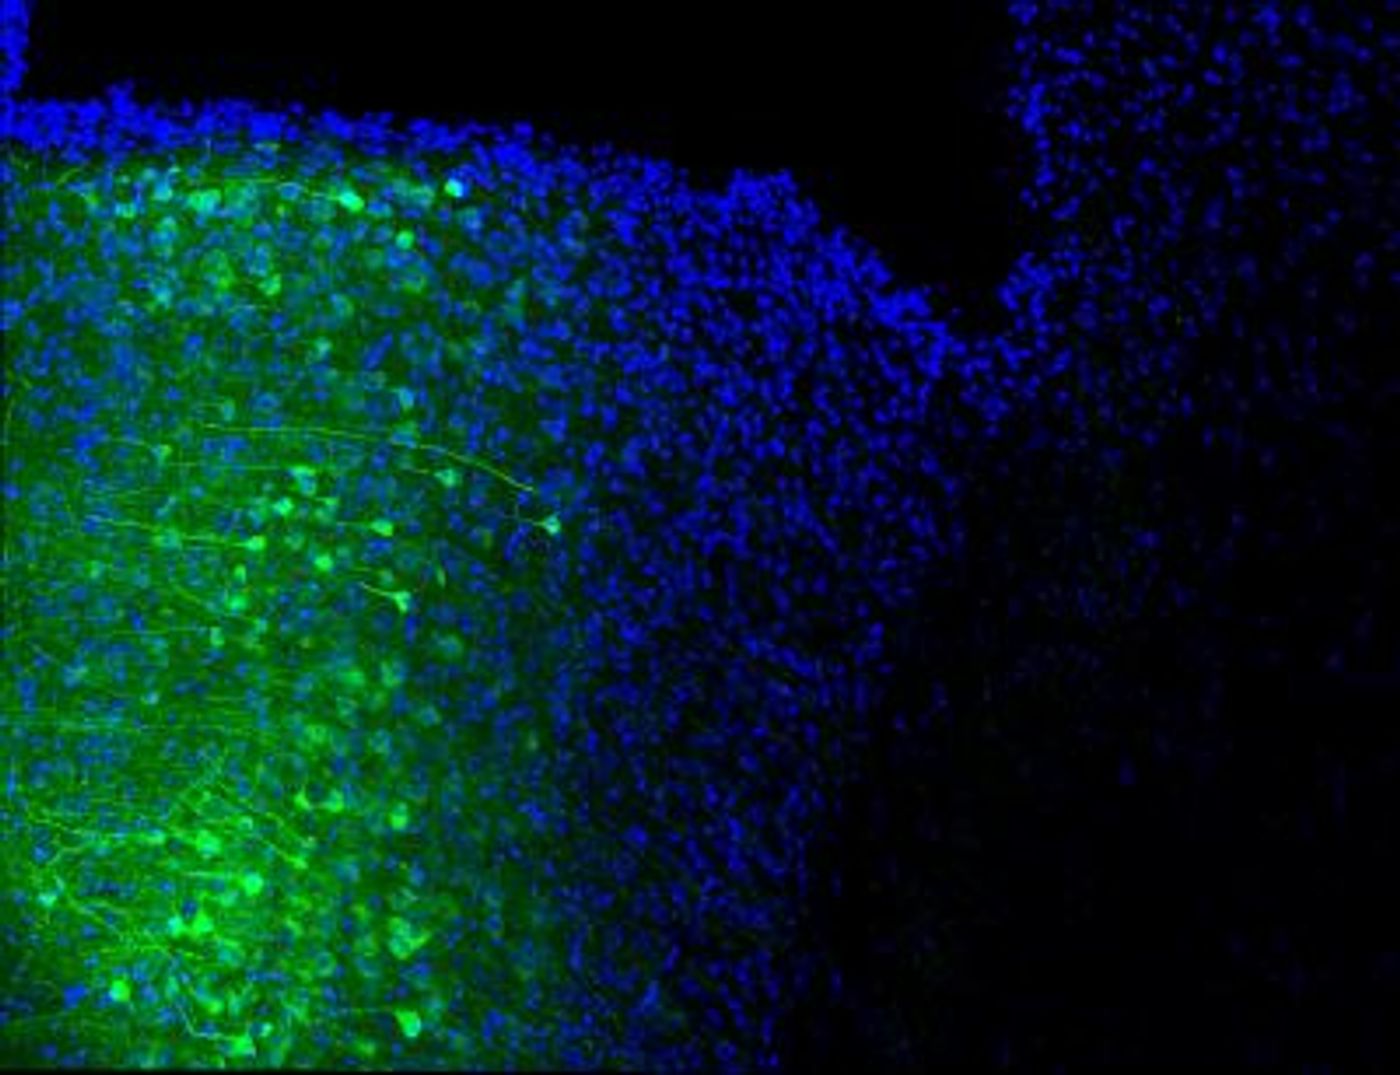 Nuclei (blue) of the medial prefrontal cortex neurons projecting their axons (green) to the periaqueductal gray area. / Credit: Salk Institute